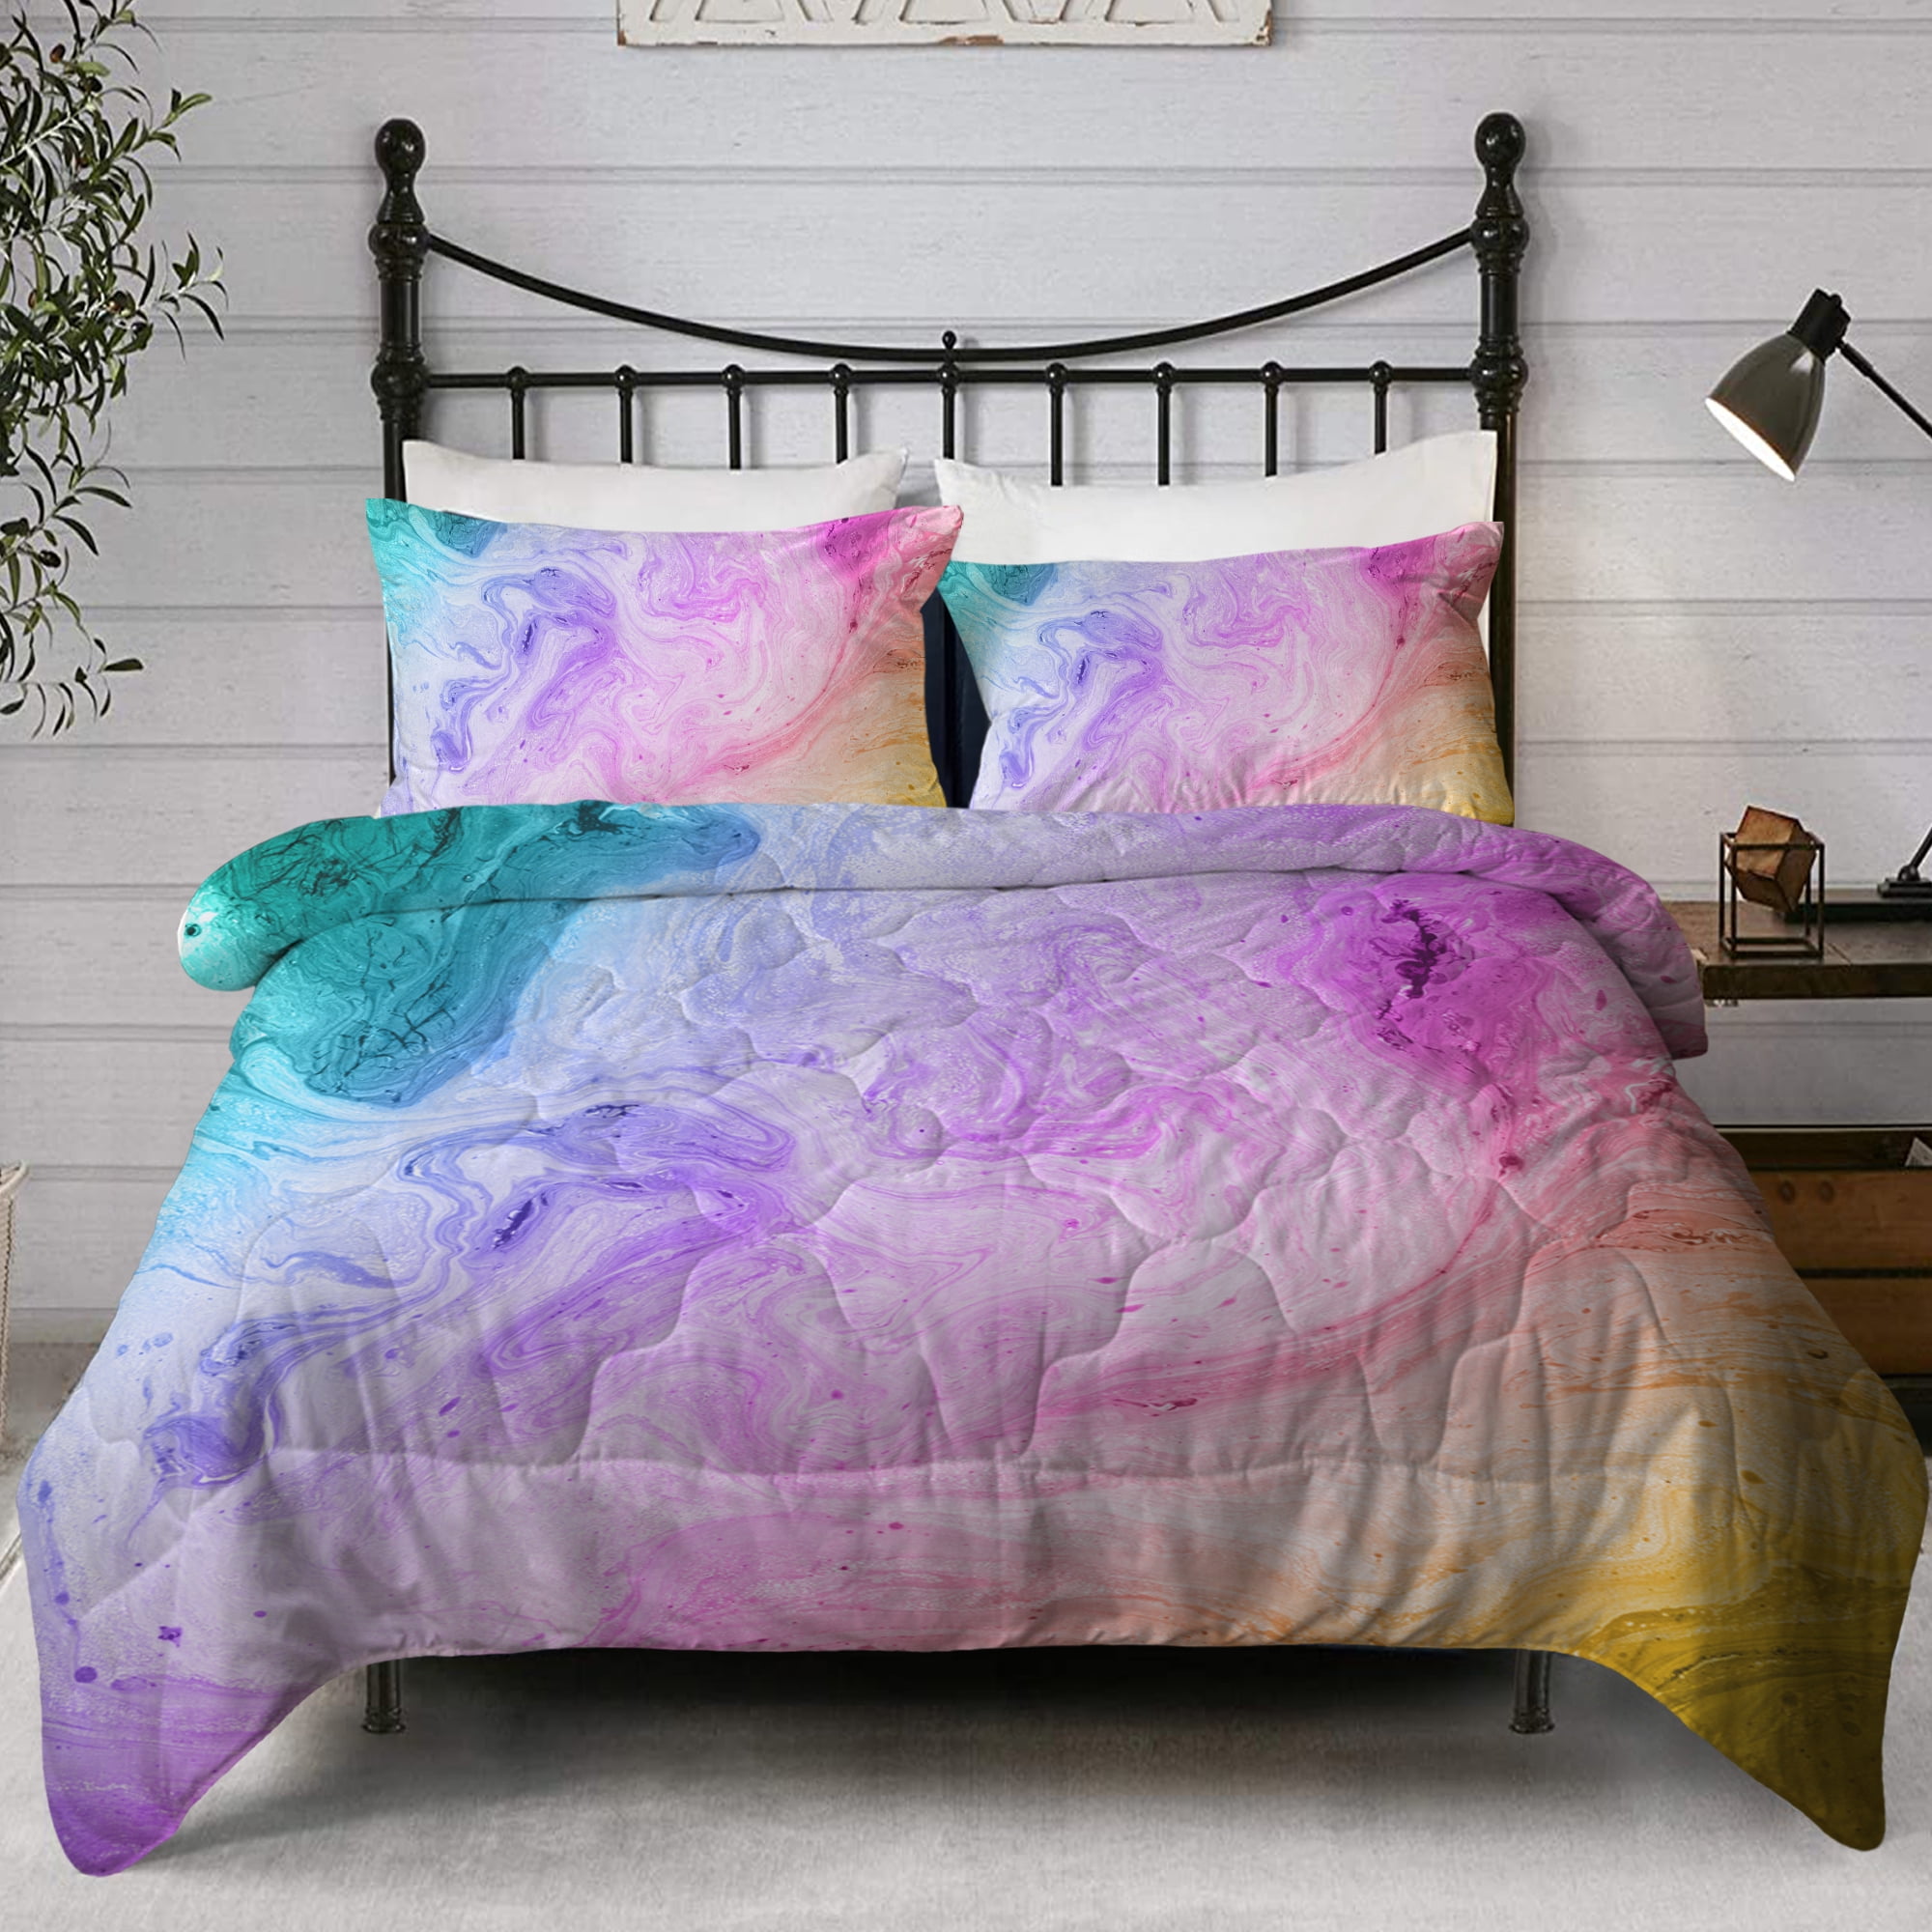 Multi Color Hippie Oil Painting Bedding Set for Teens Kids Boys,Colorful Abstract Art Pattern Printing Soft Microfiber Comforter Cover with 2 Pillowcases Watercolor Tie-dye Duvet Cover Set Full Size